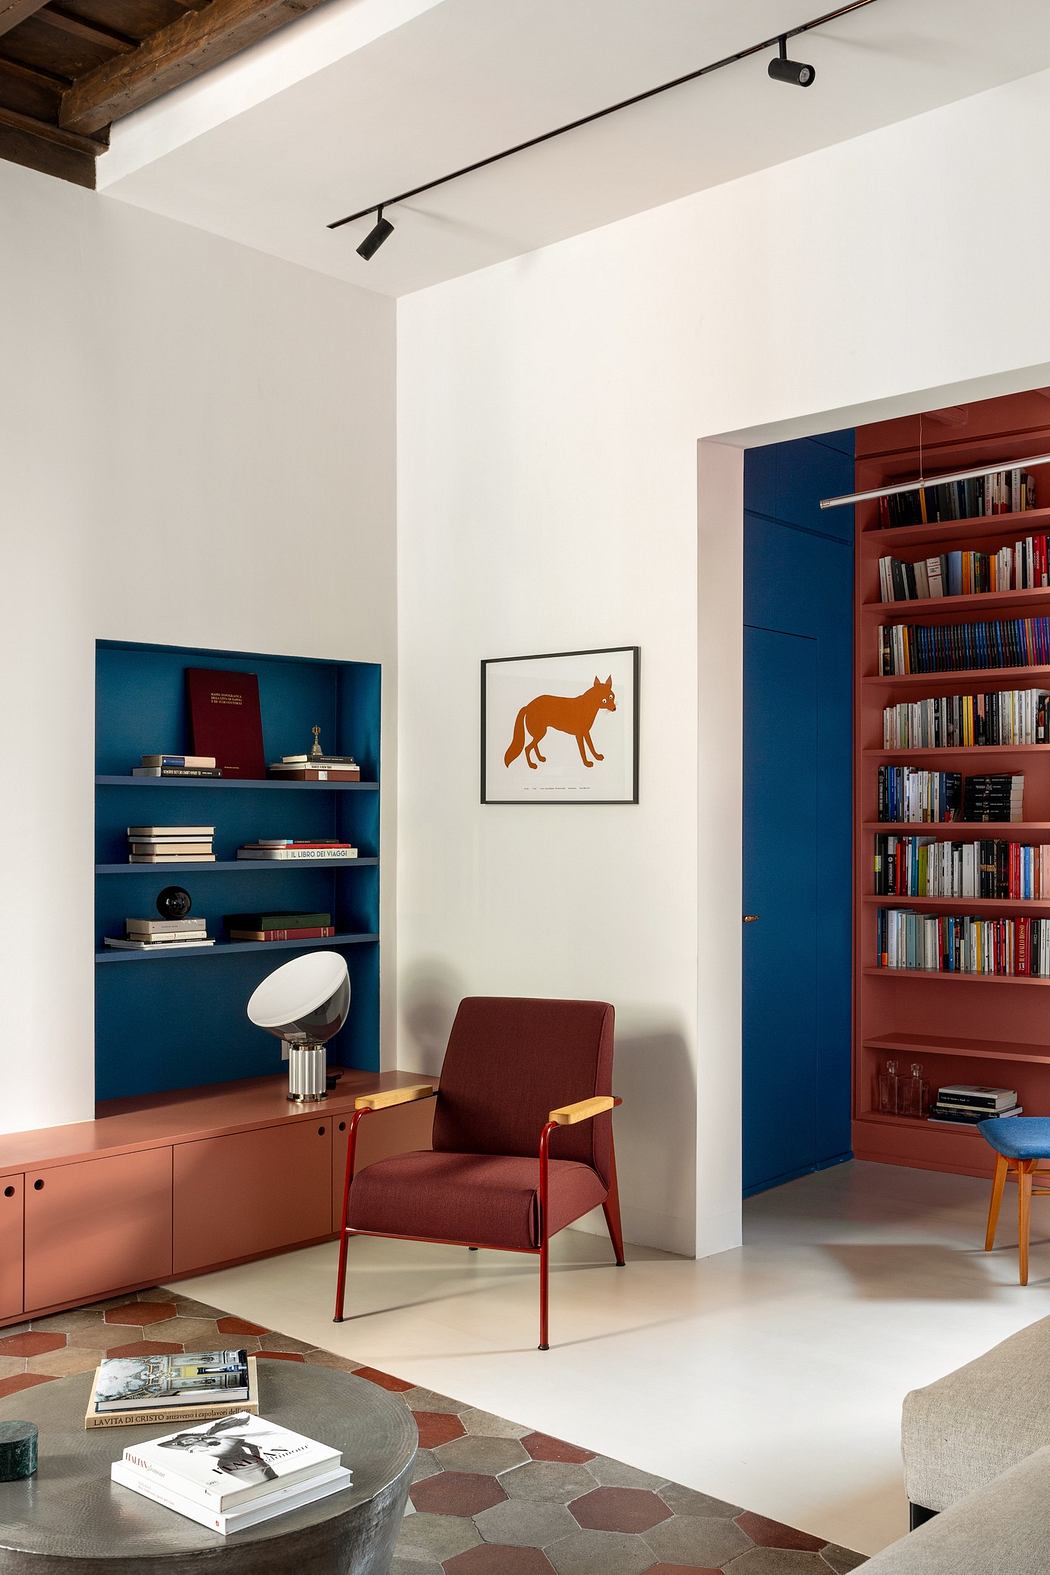 Modern living room with blue bookshelf, red chair, and terracotta accents